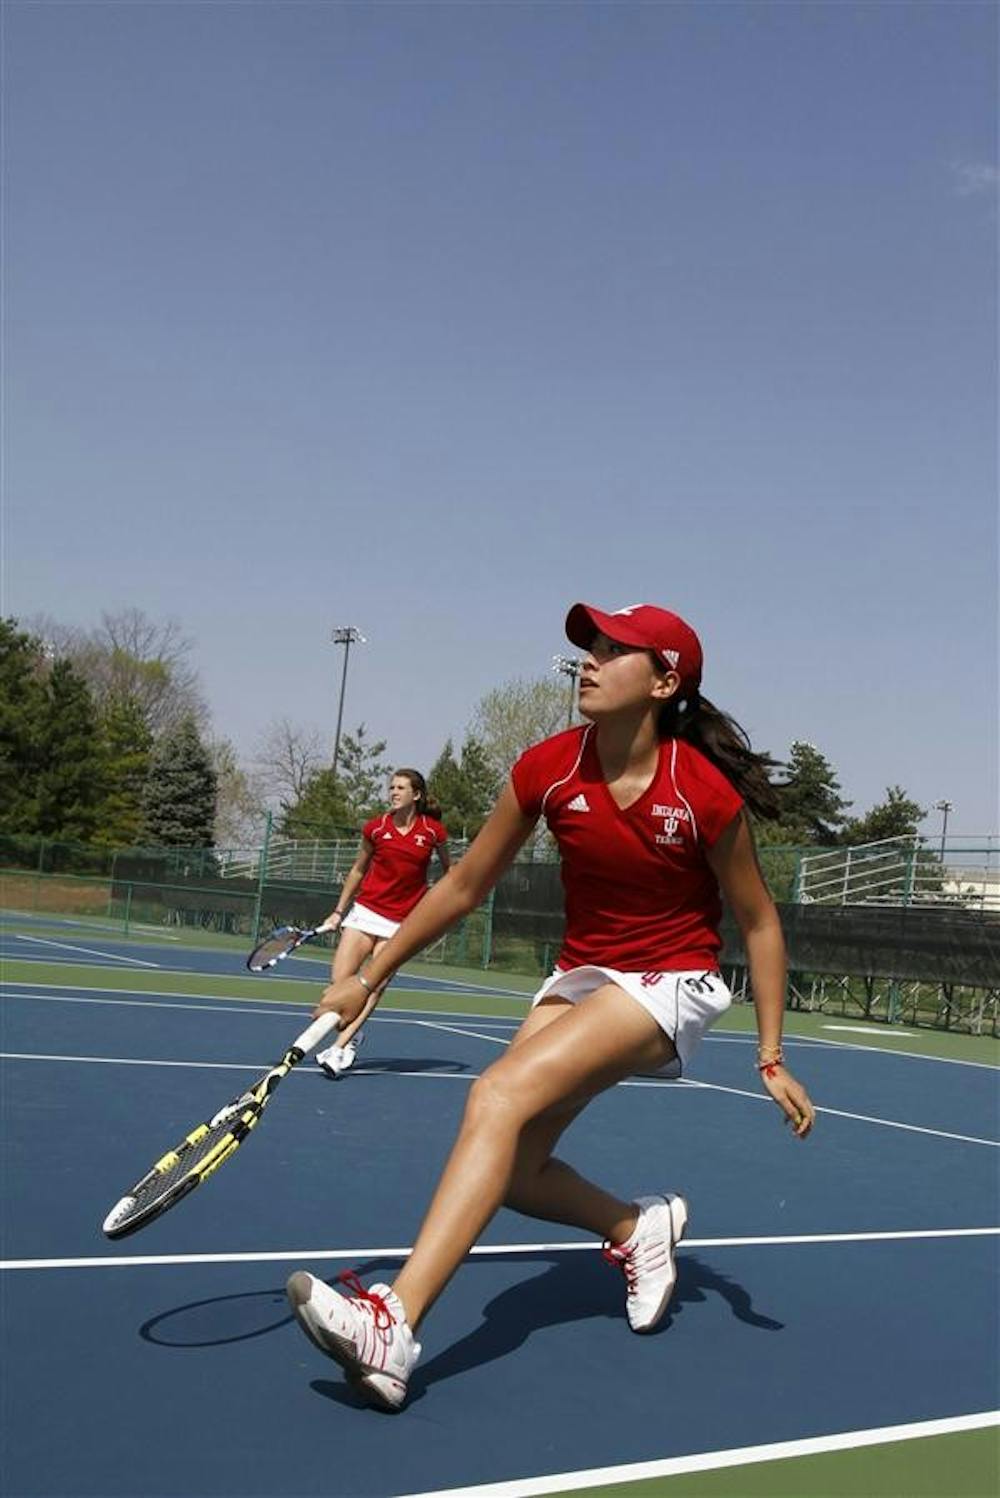 Sophomore Kayla Fujimoto (front) and senior Evgeniya Vertesheva prepare to return the ball in doubles play against the Minnesota Gophers on April 10 at the Indiana University Tennis Center. Fujimoto competed in the ITA Summer Circuit regional competition the weekend of July 30 at IU.